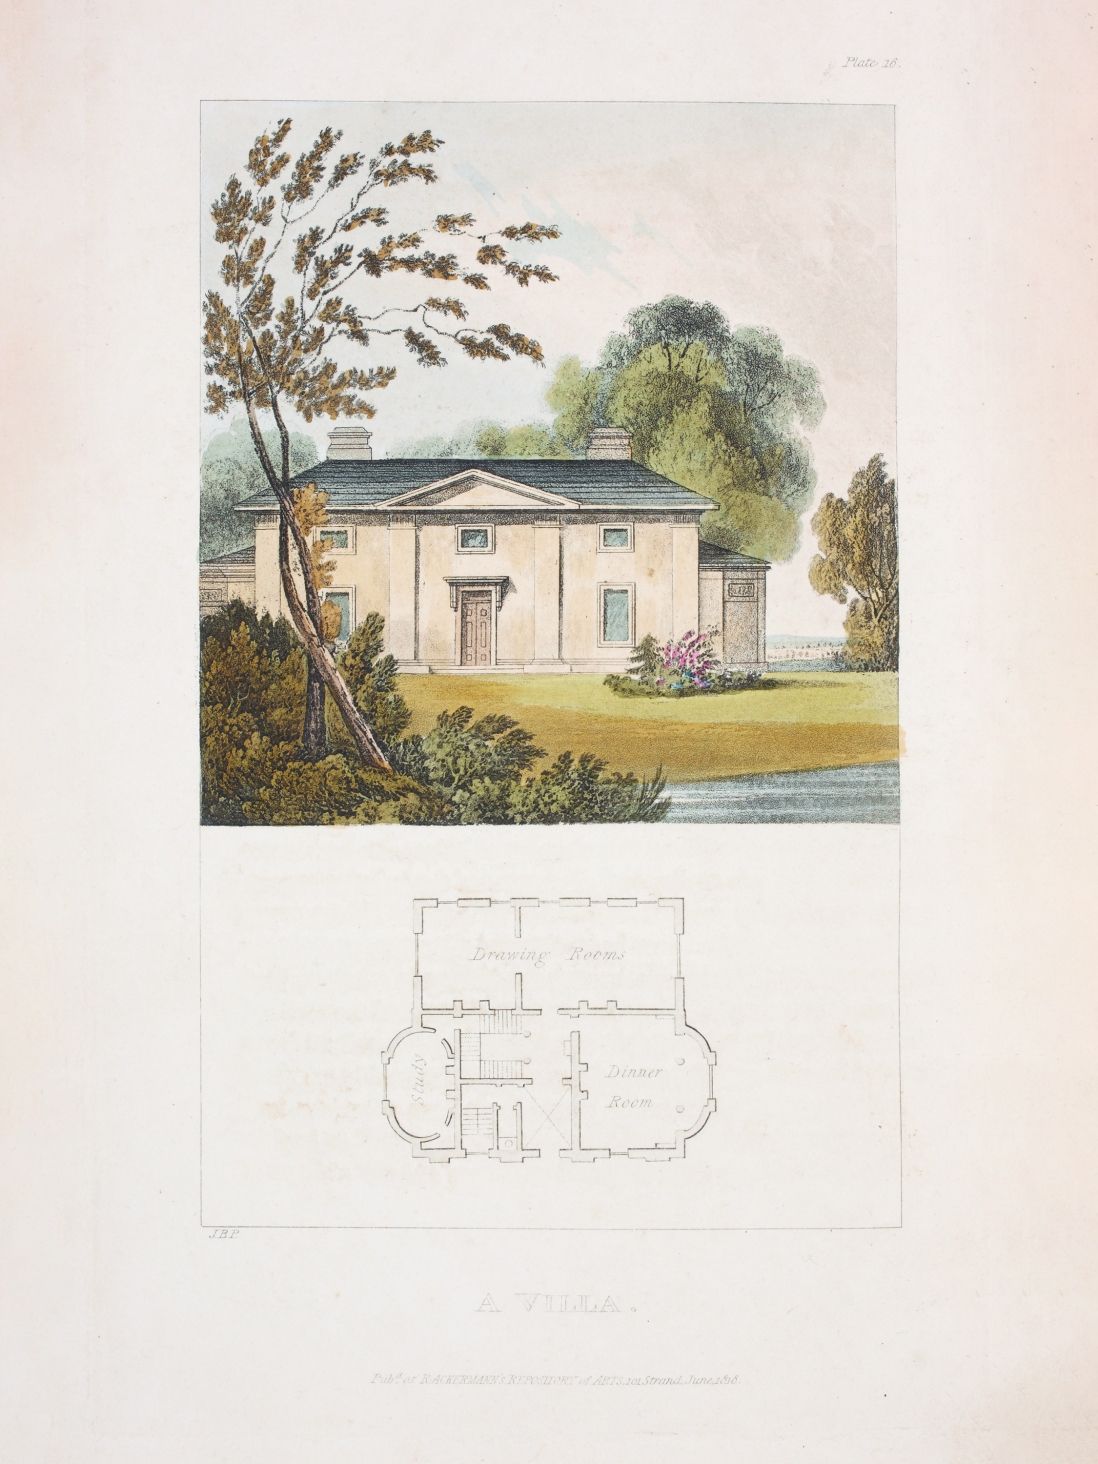 A watercolour paiting of a house with a plan skecth underneath